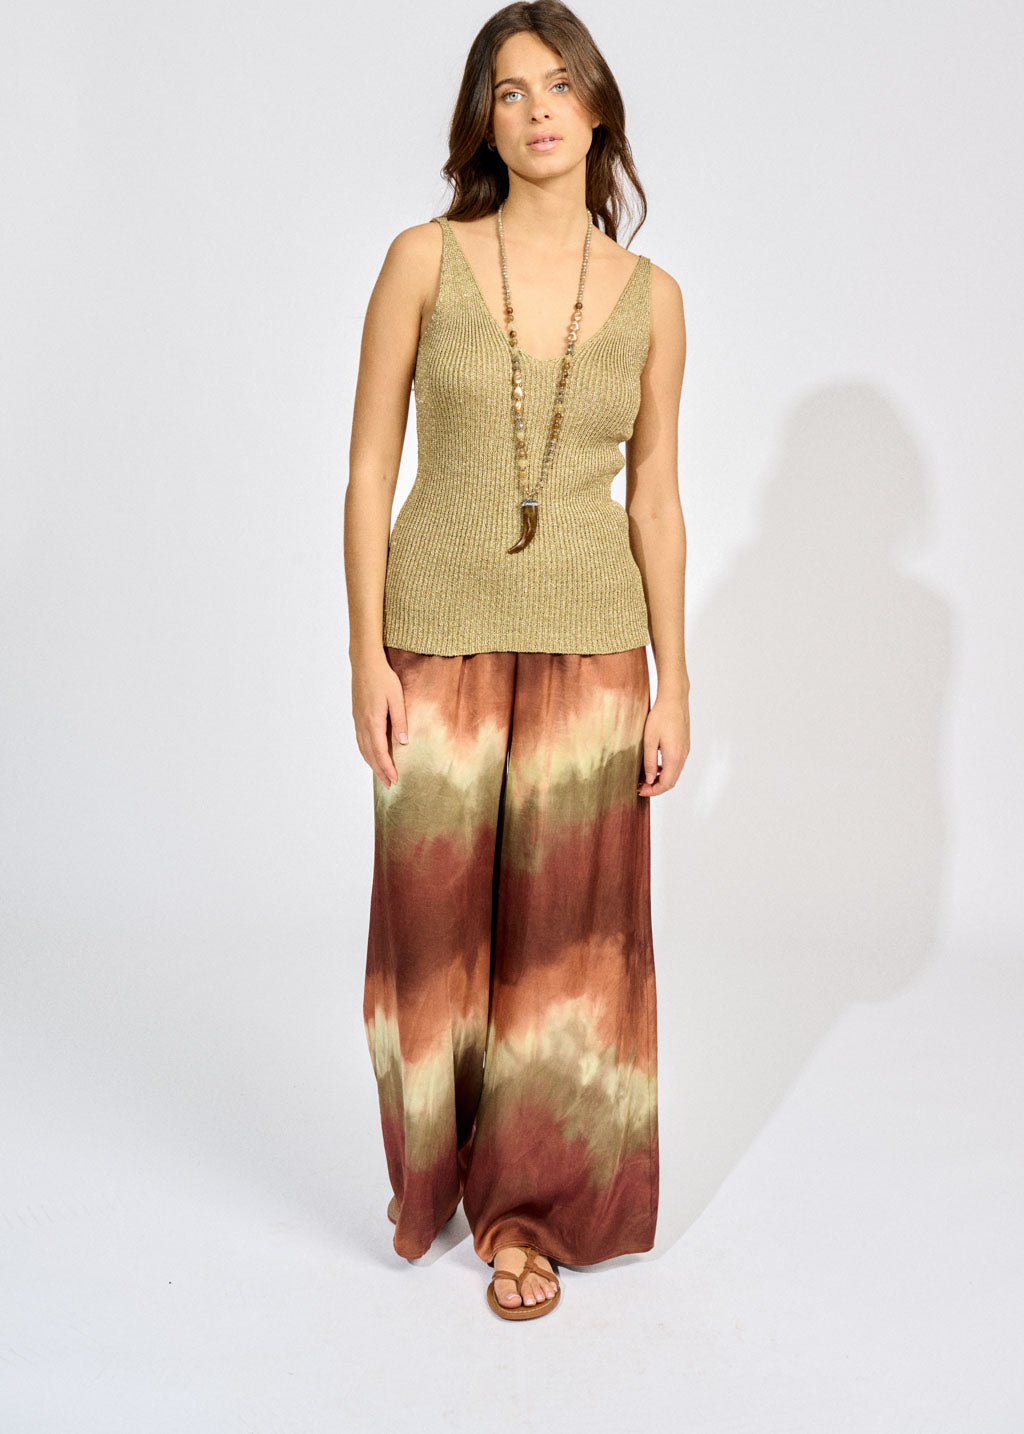 FAME TIE AND DYE LARGE TROUSERS